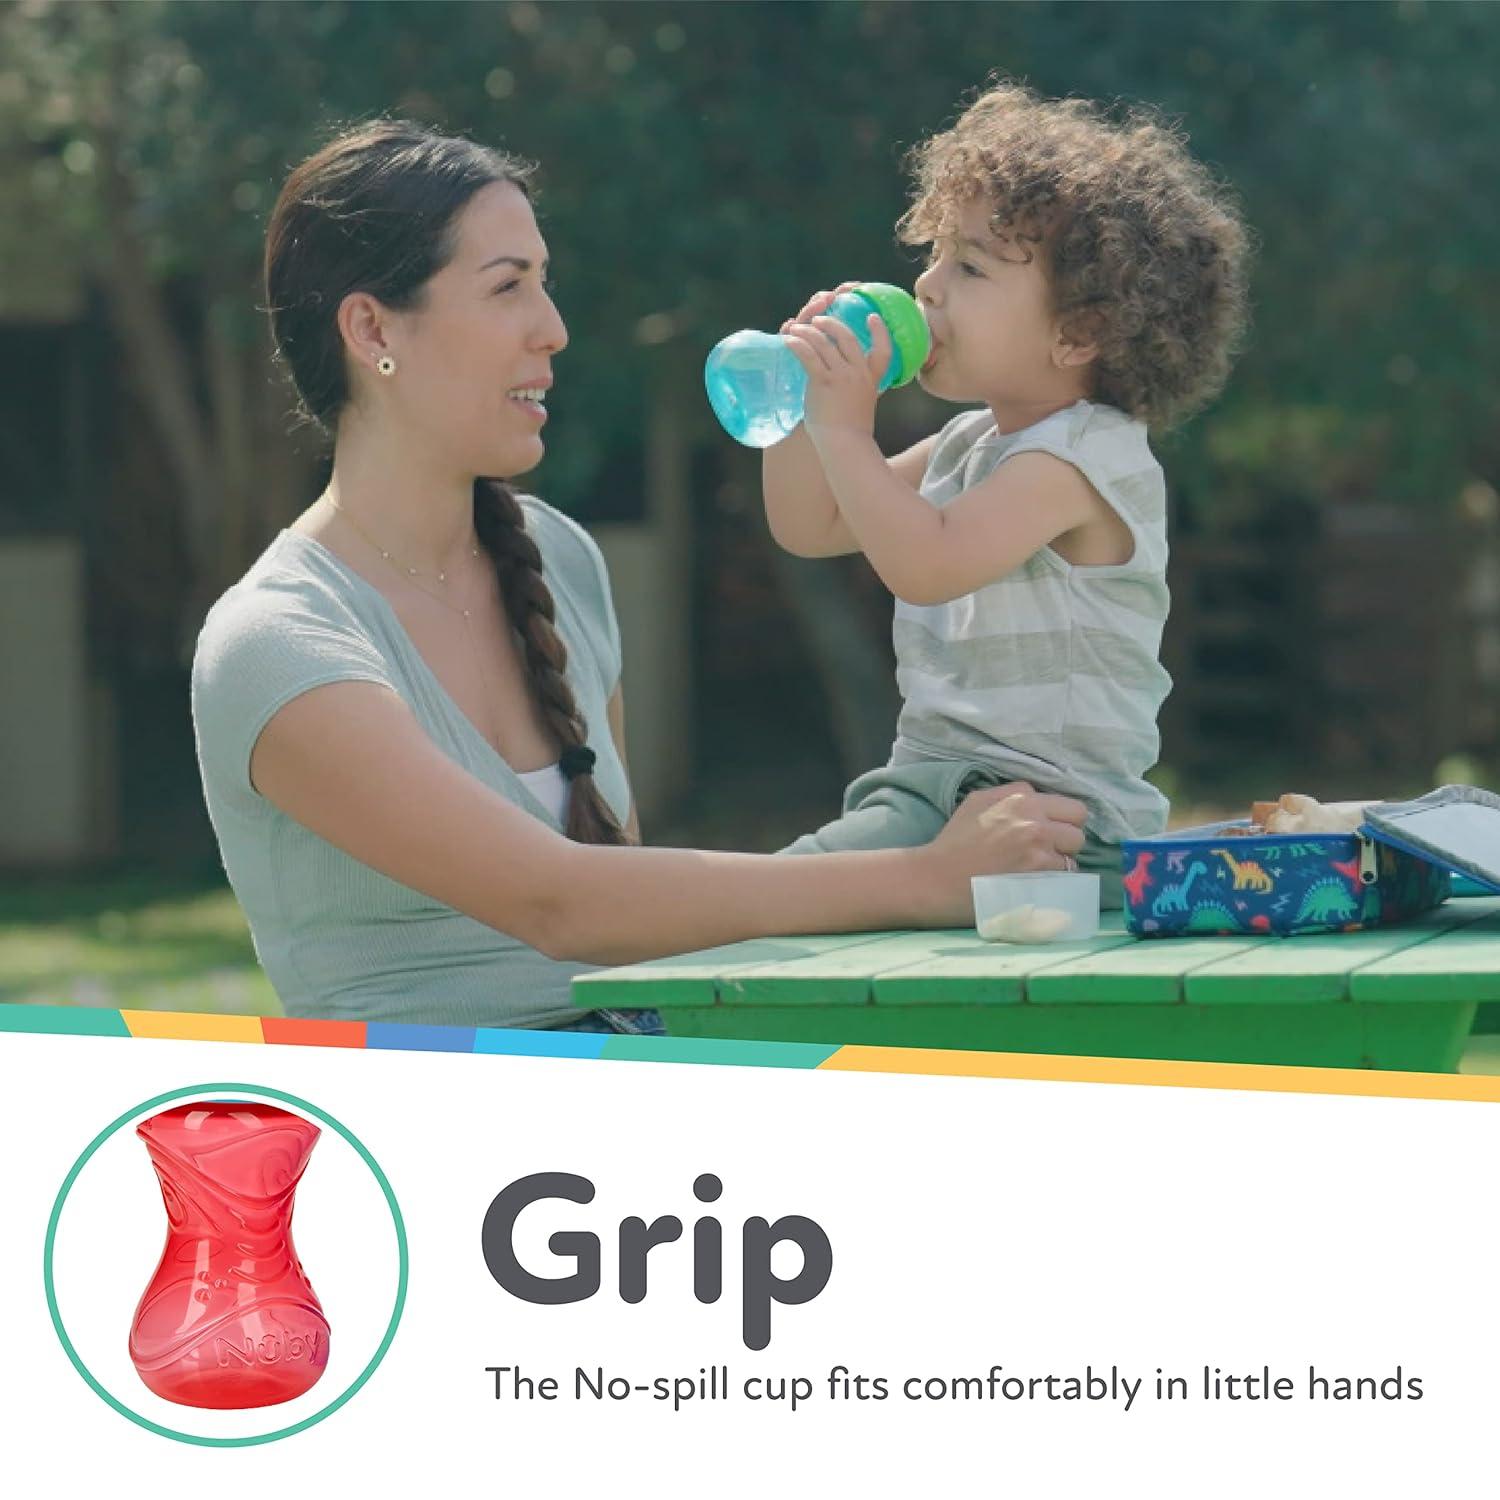 Nuby Sippy Cups | Leak-Proof | Soft Spout | Toddler No Spill | 3 pack | 10  oz